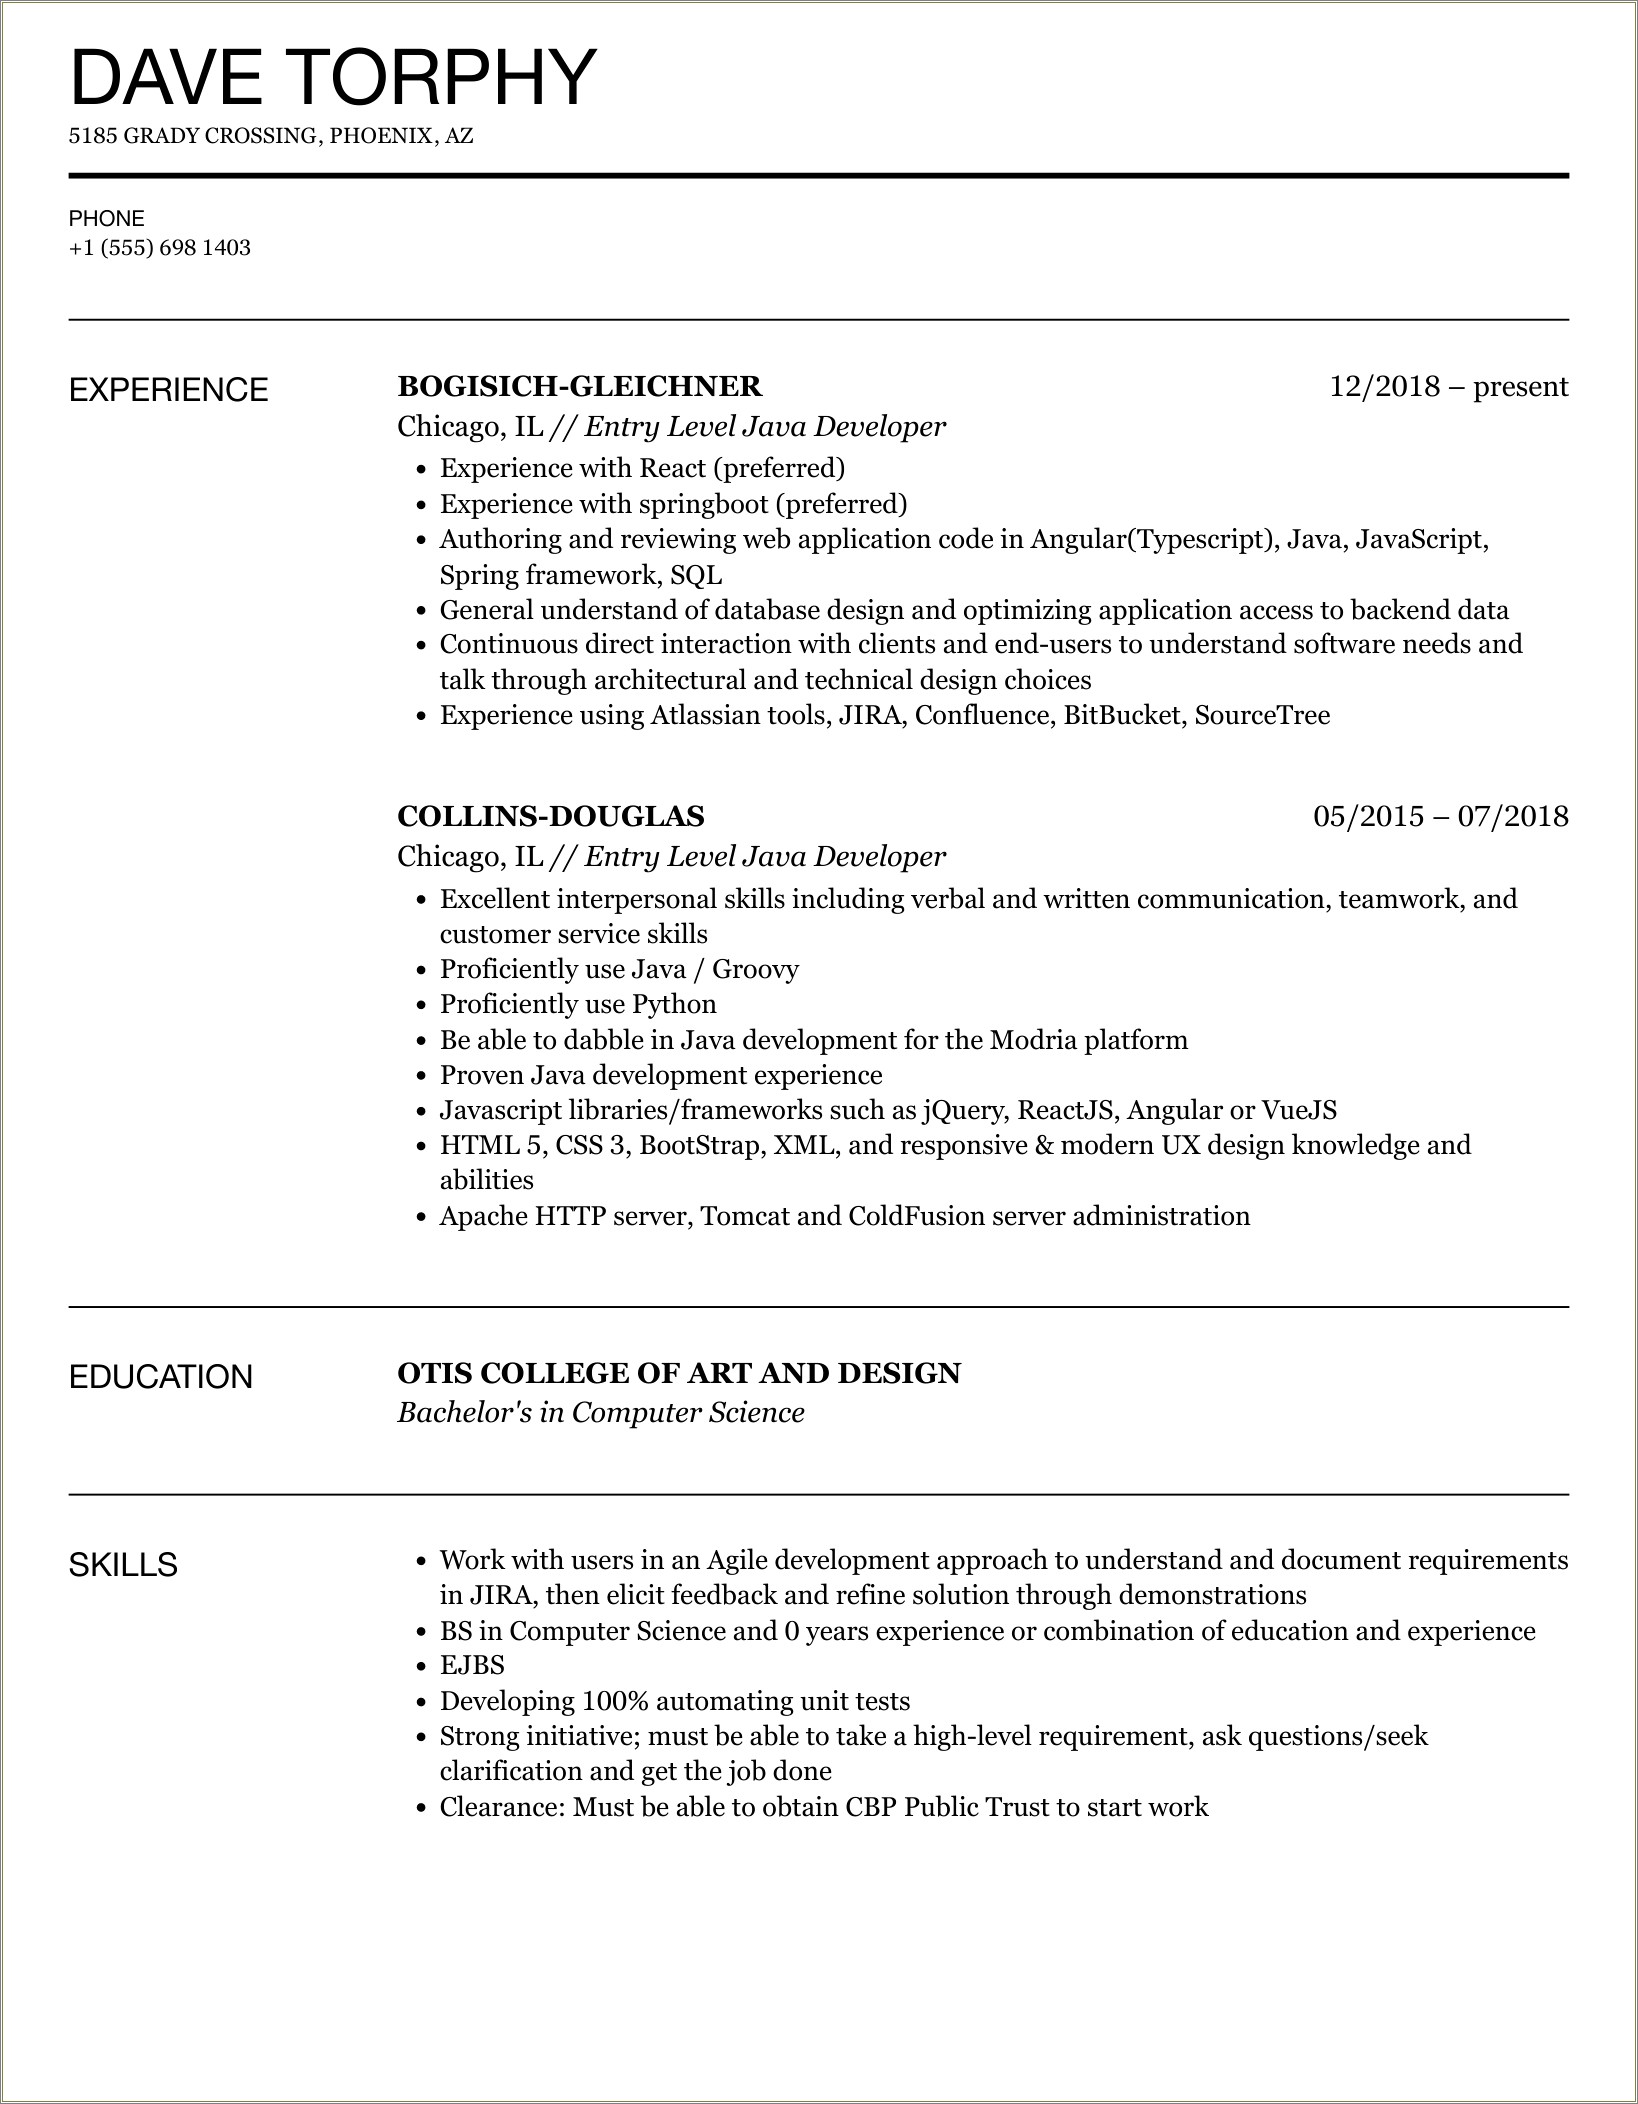 General Resume Objective Examples For Entry Level